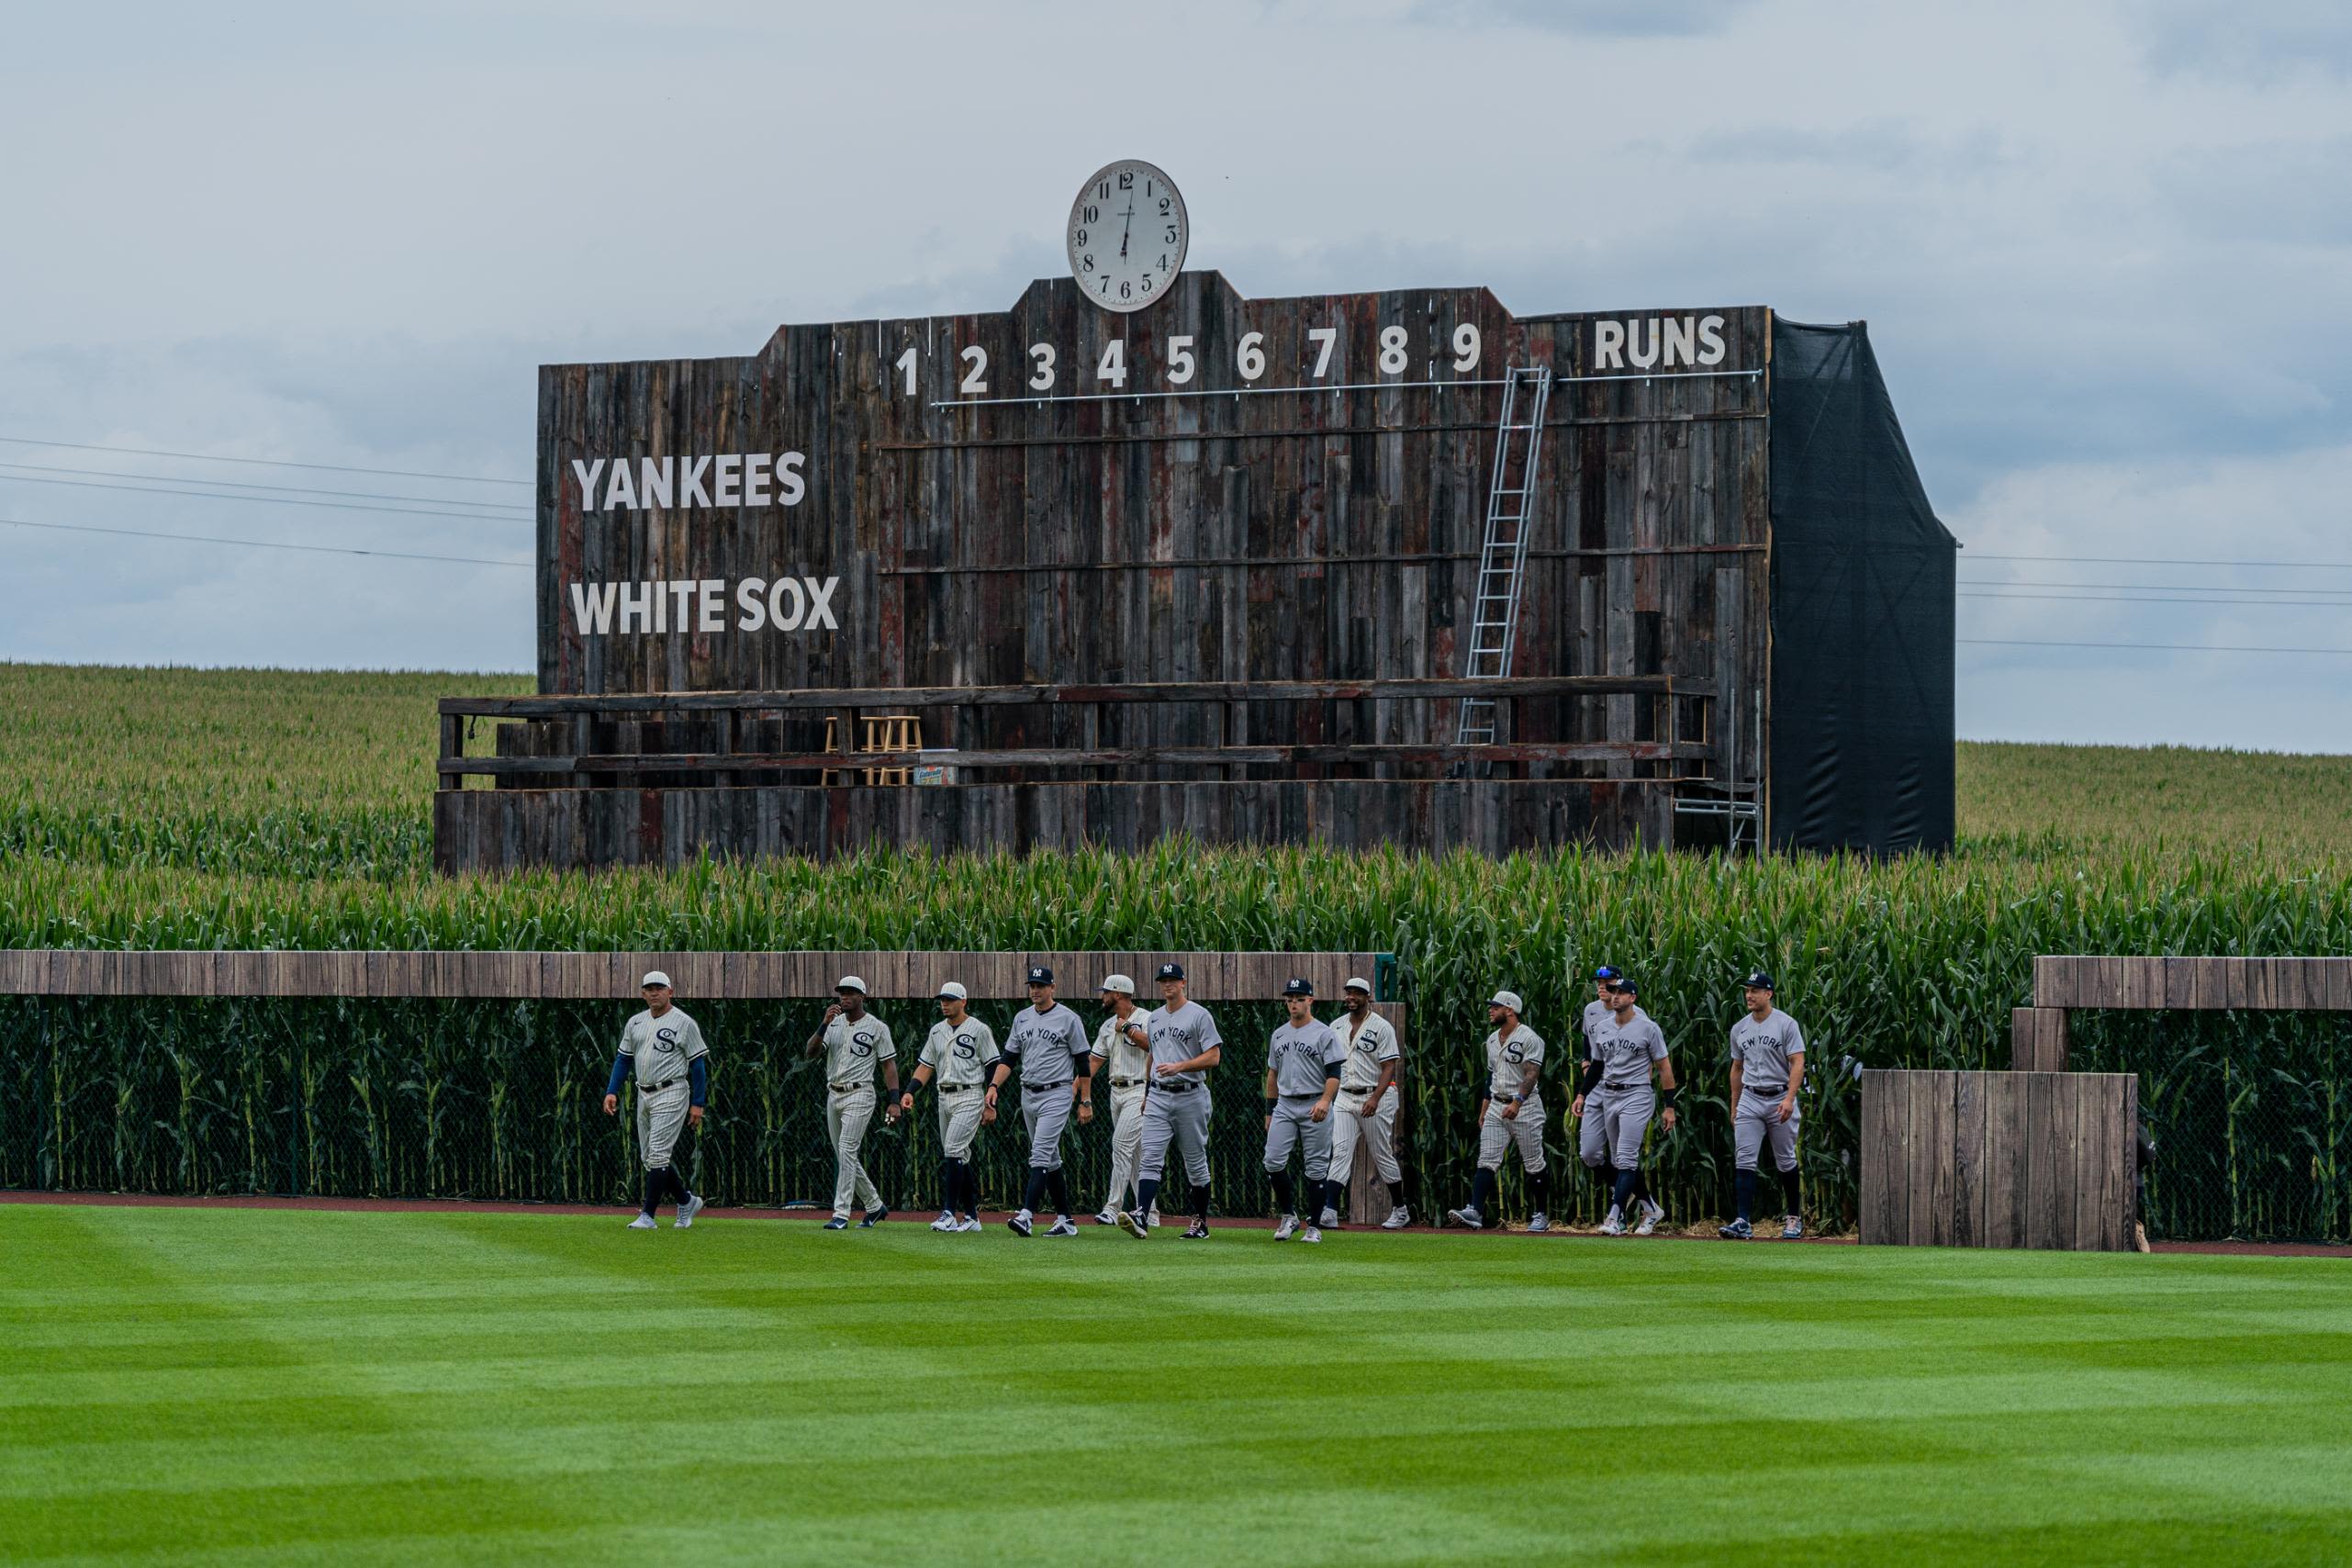 The Field of Dreams Baseball Field is Real - And You Can Go There